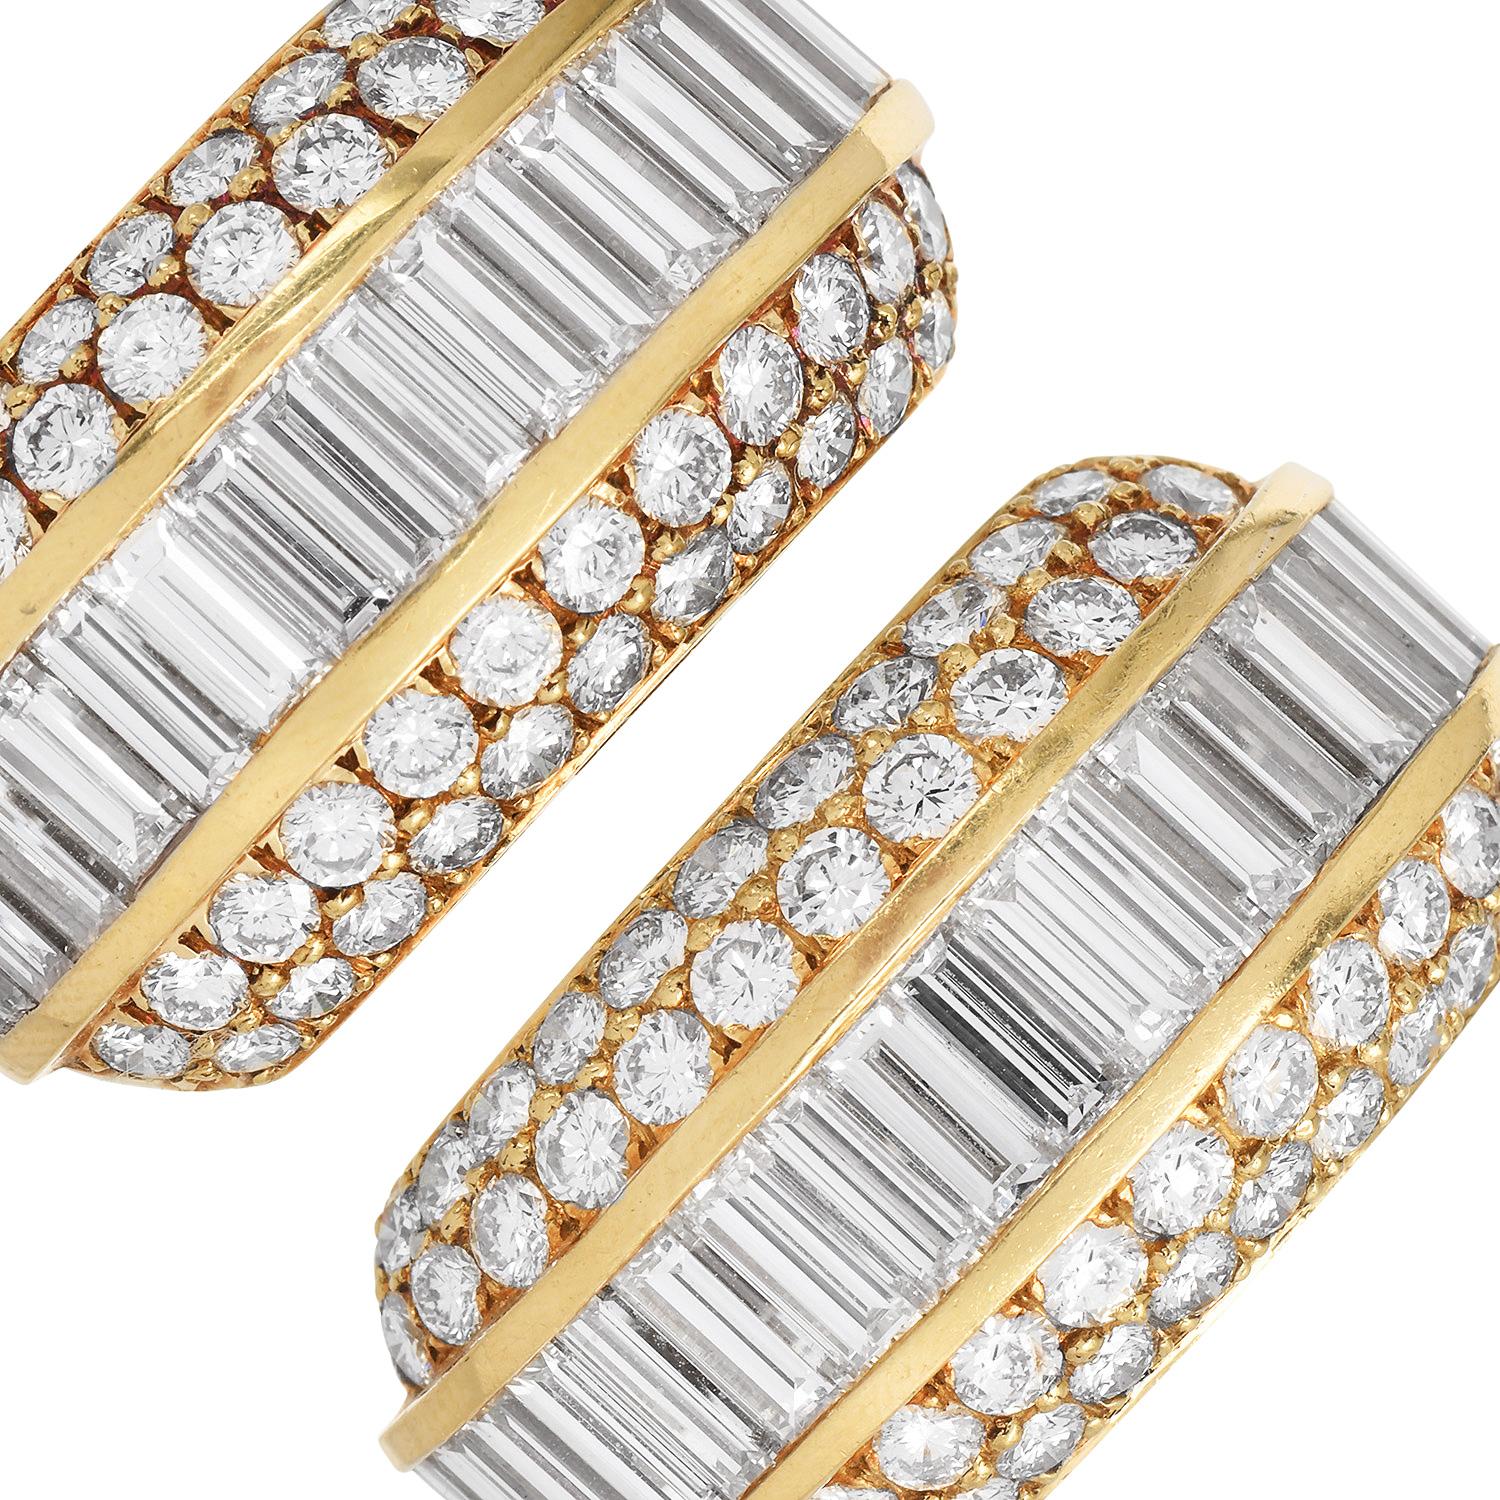 Superb quality diamond earring from the early 1980s with  Natural Diamond set Dome Curved t Clip-On 18k yellow gold Earrings

Secured with Clip-On Closure (Post can be added)

Metal: 18K Yellow Gold

Earrings Measures: 31mm x 16mm

Number of